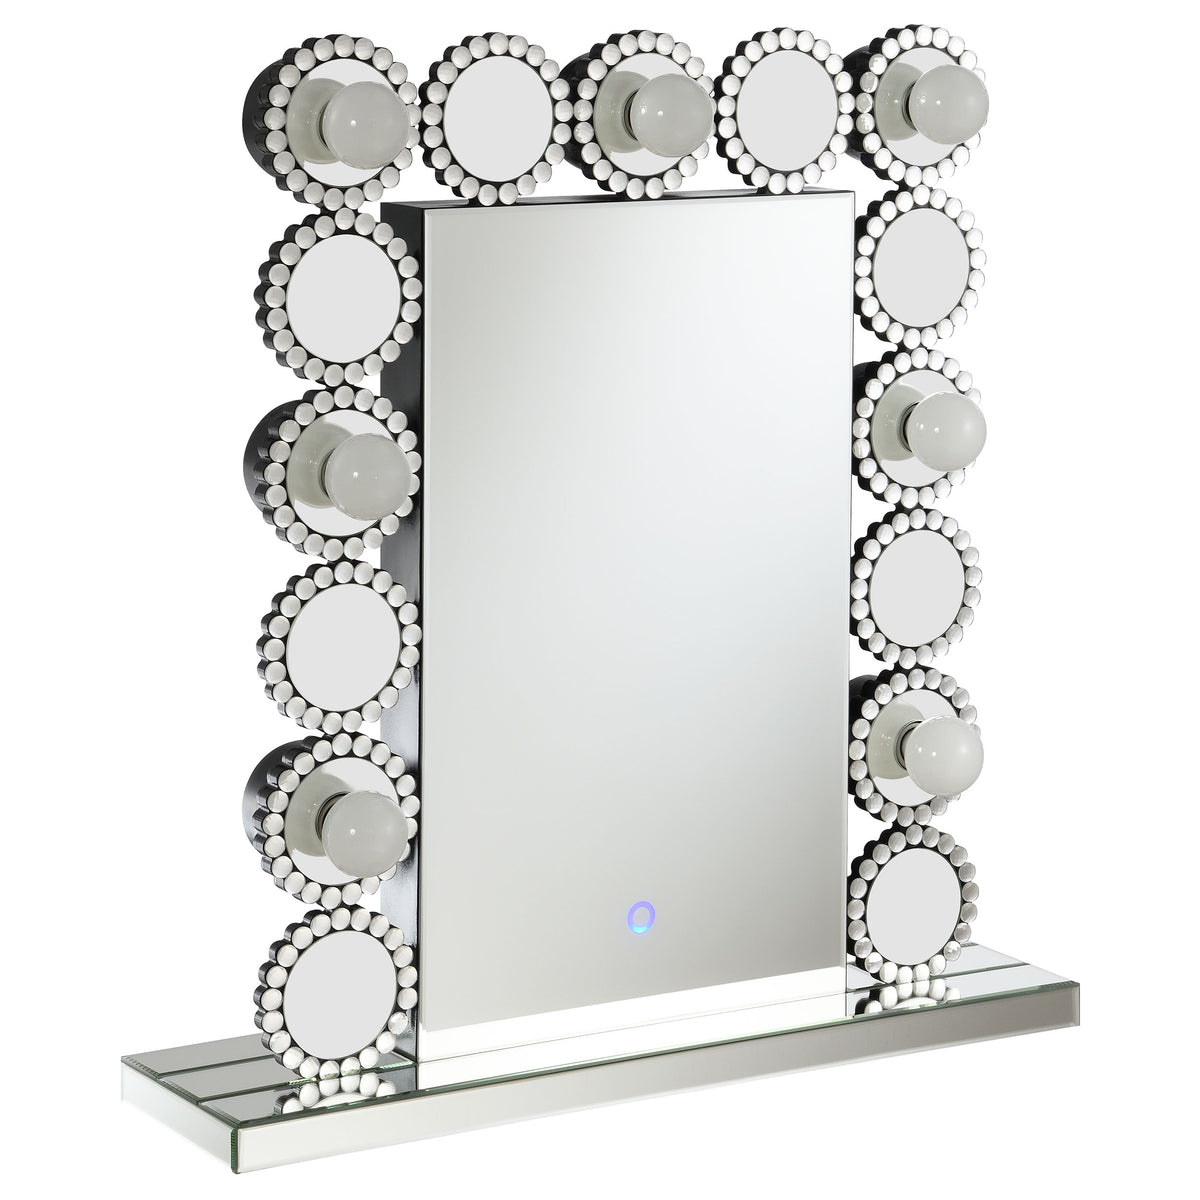 Aghes Rectangular Table Mirror with LED Lighting Mirror Aghes Rectangular Table Mirror with LED Lighting Mirror 